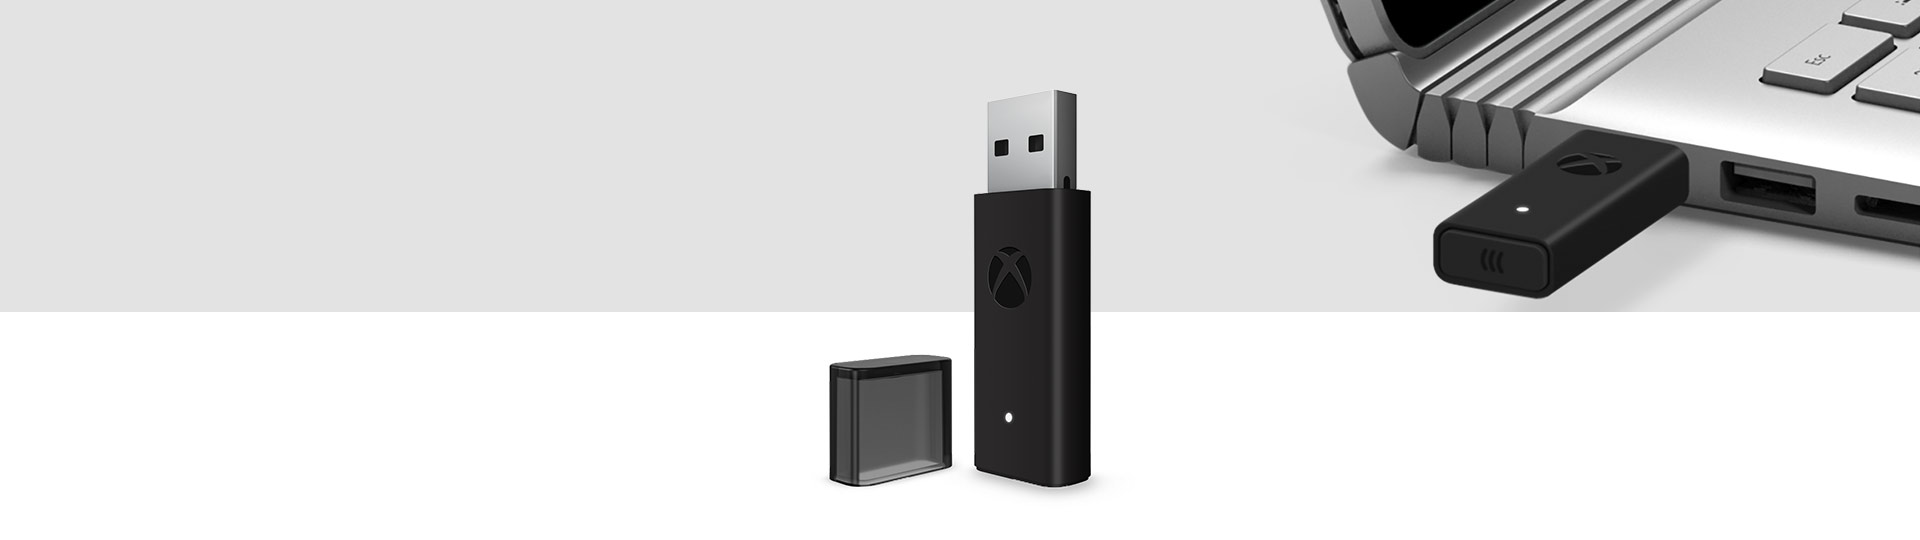 xbox wireless adapter multiple controllers